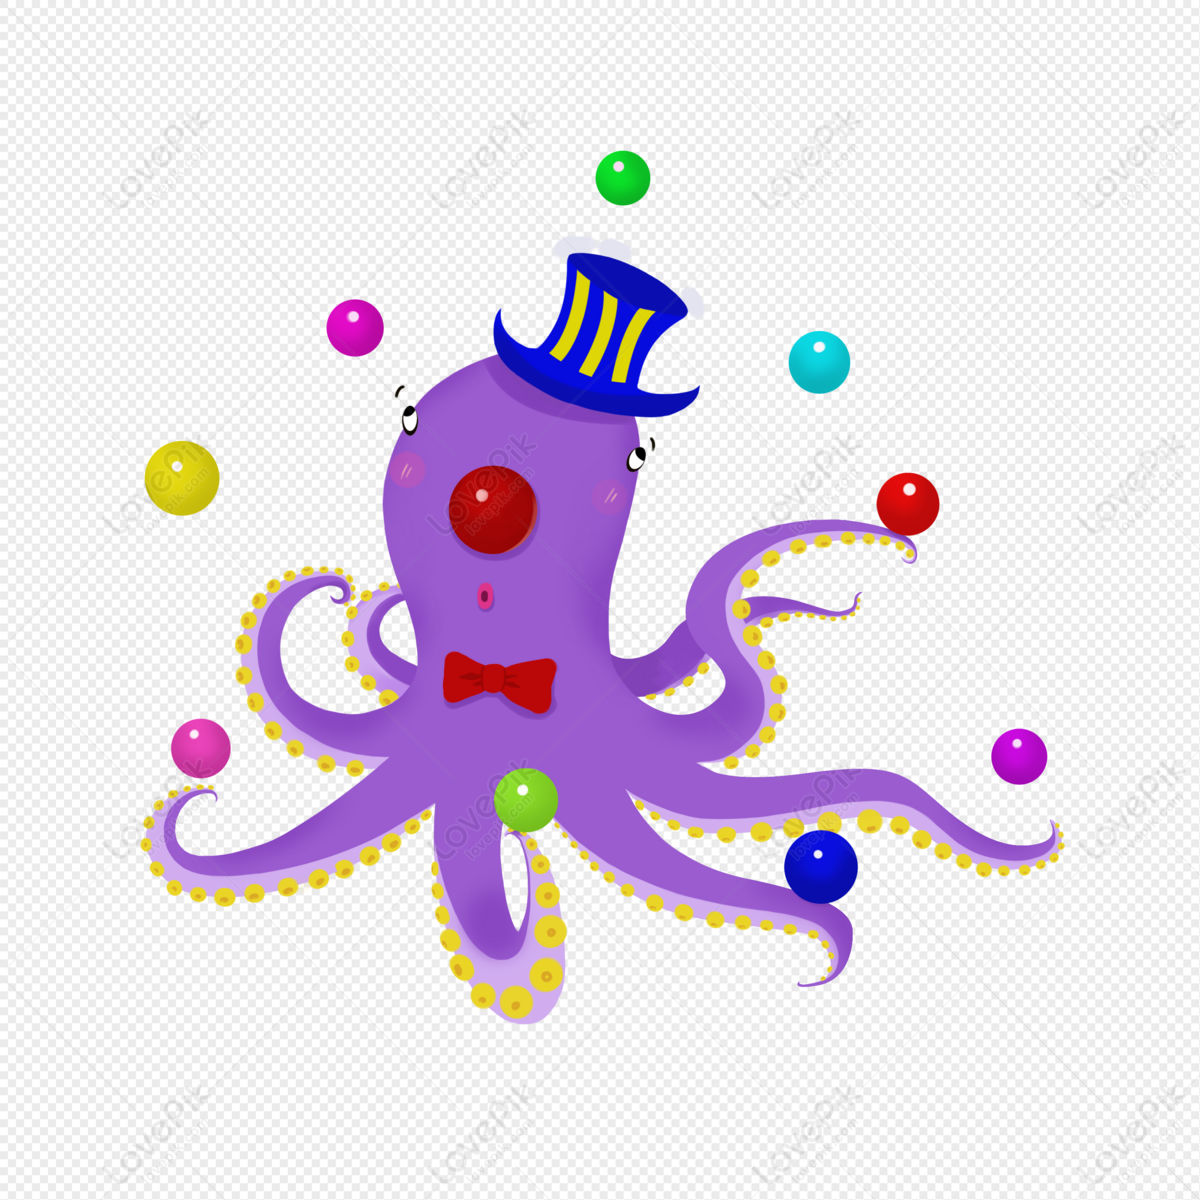 Octopus Show PNG Image And Clipart Image For Free Download - Lovepik |  401694028